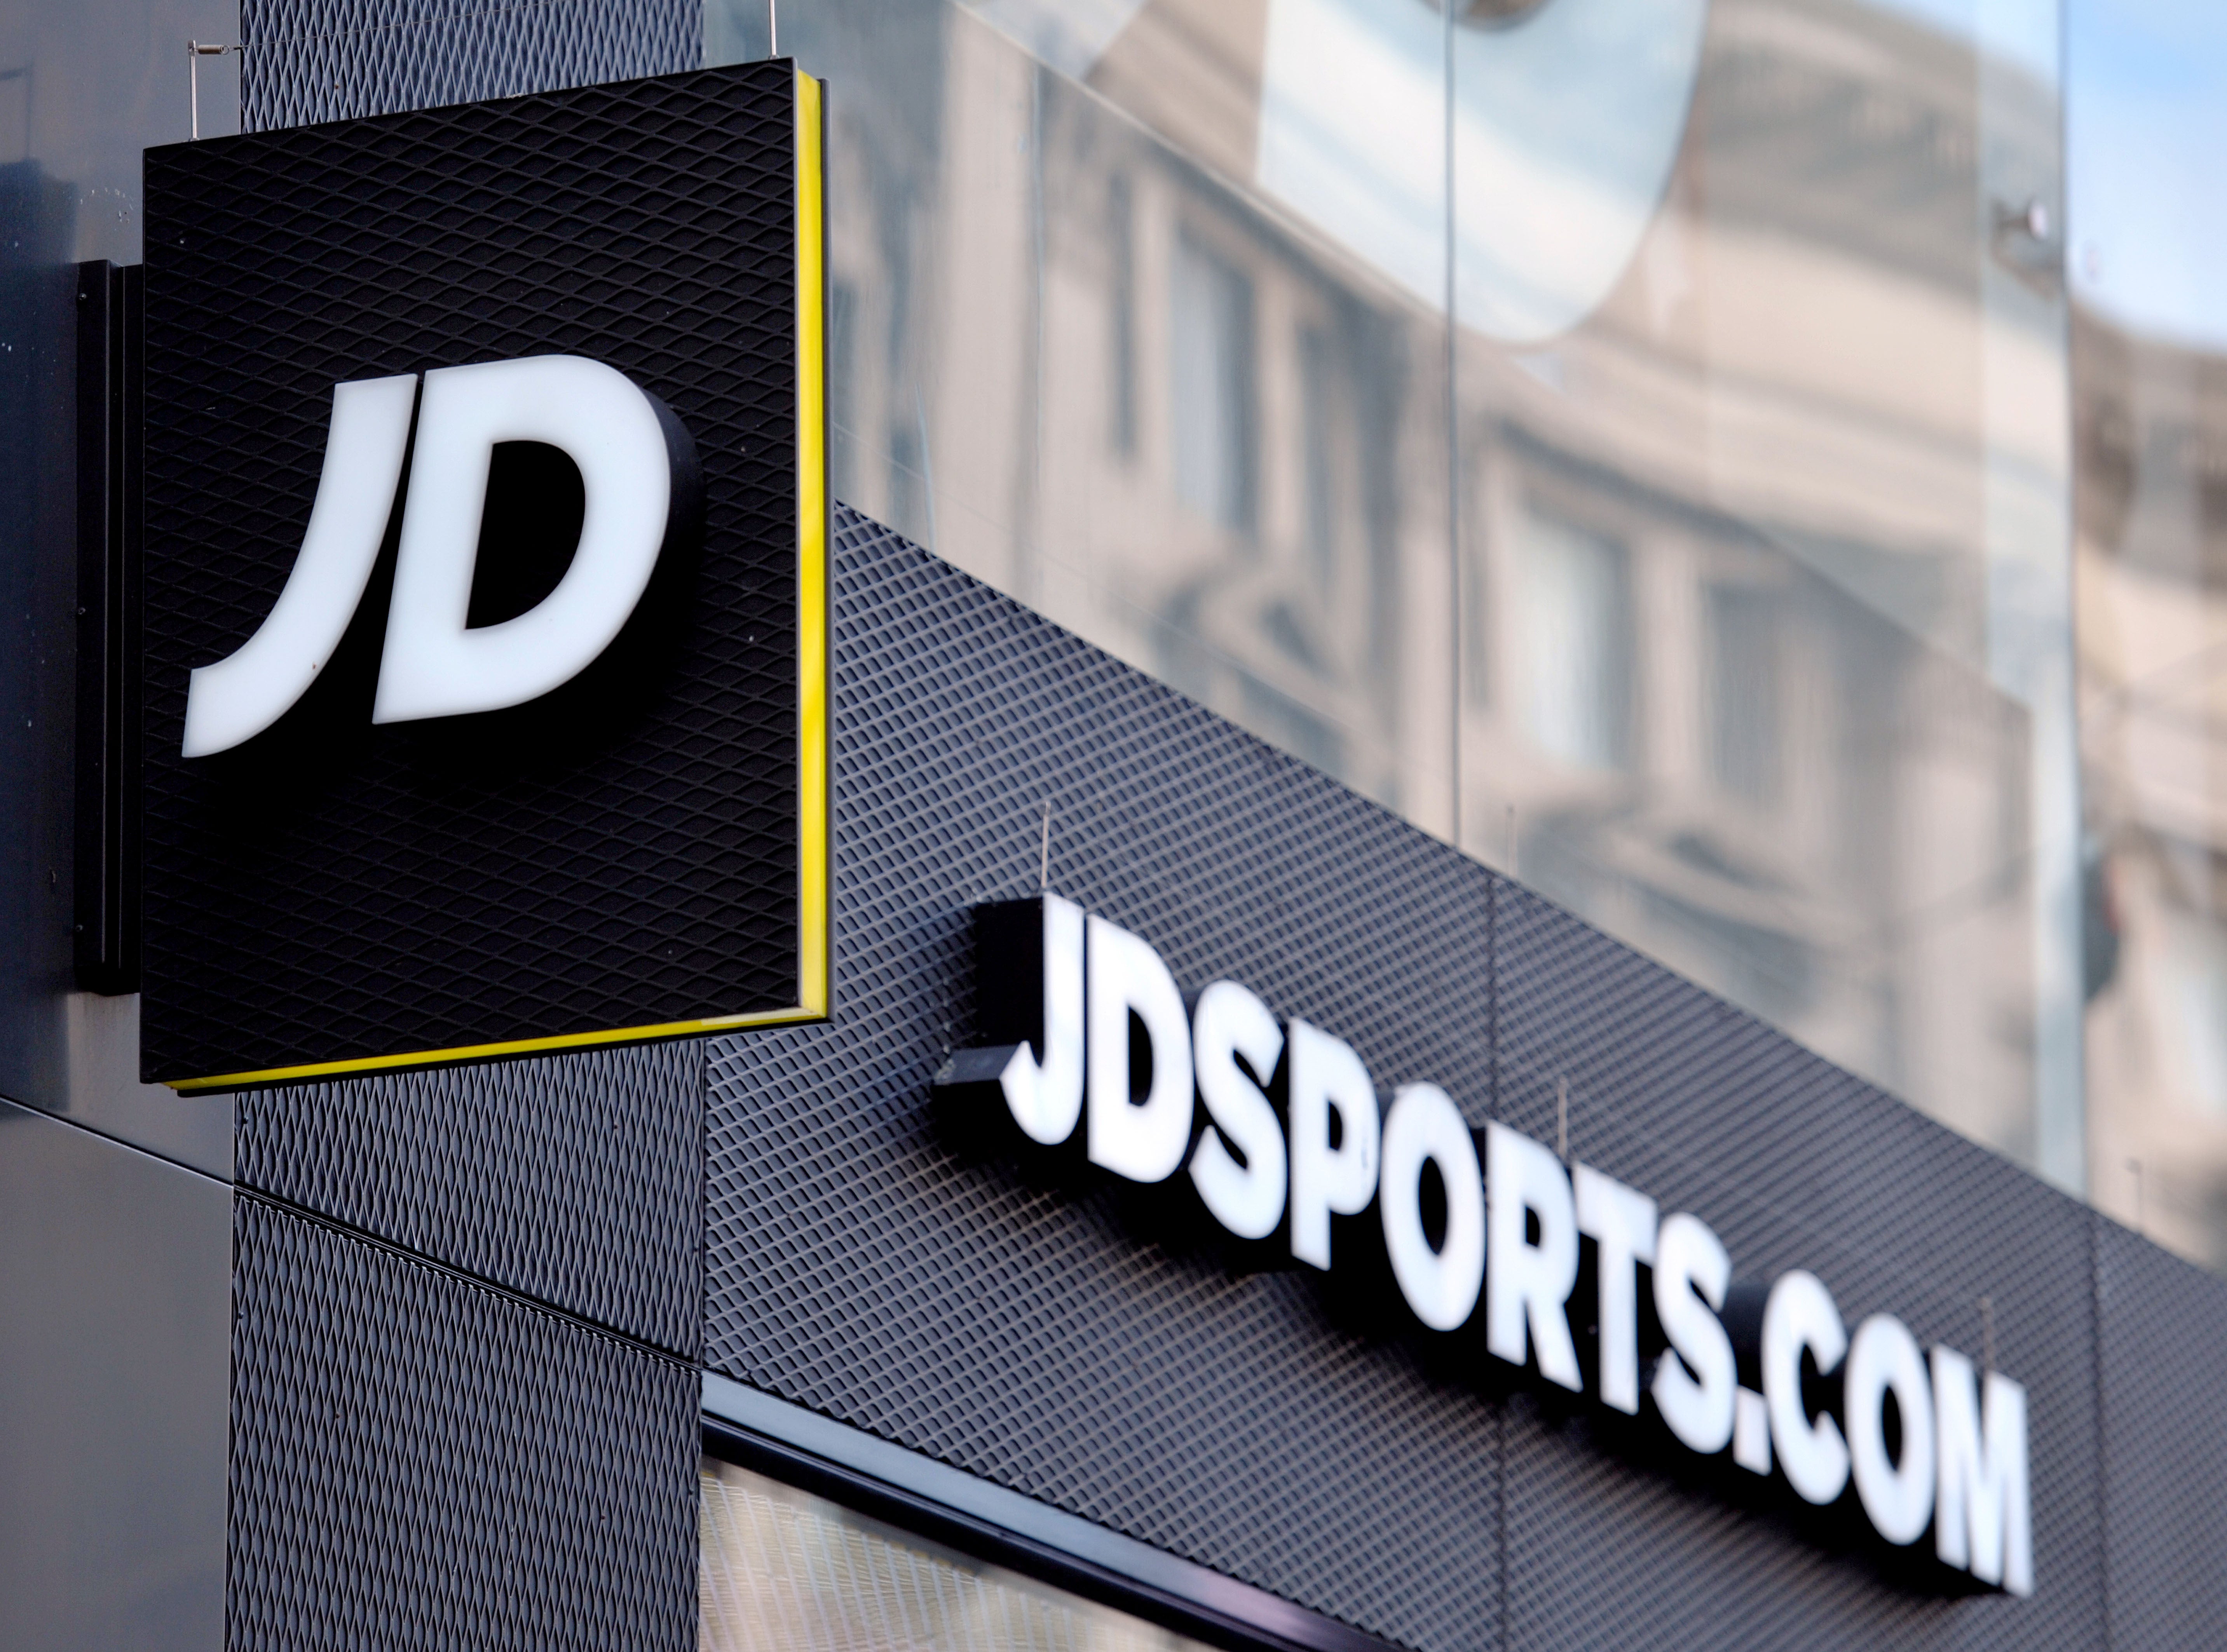 JD Sports: still the ‘King of the streets’?